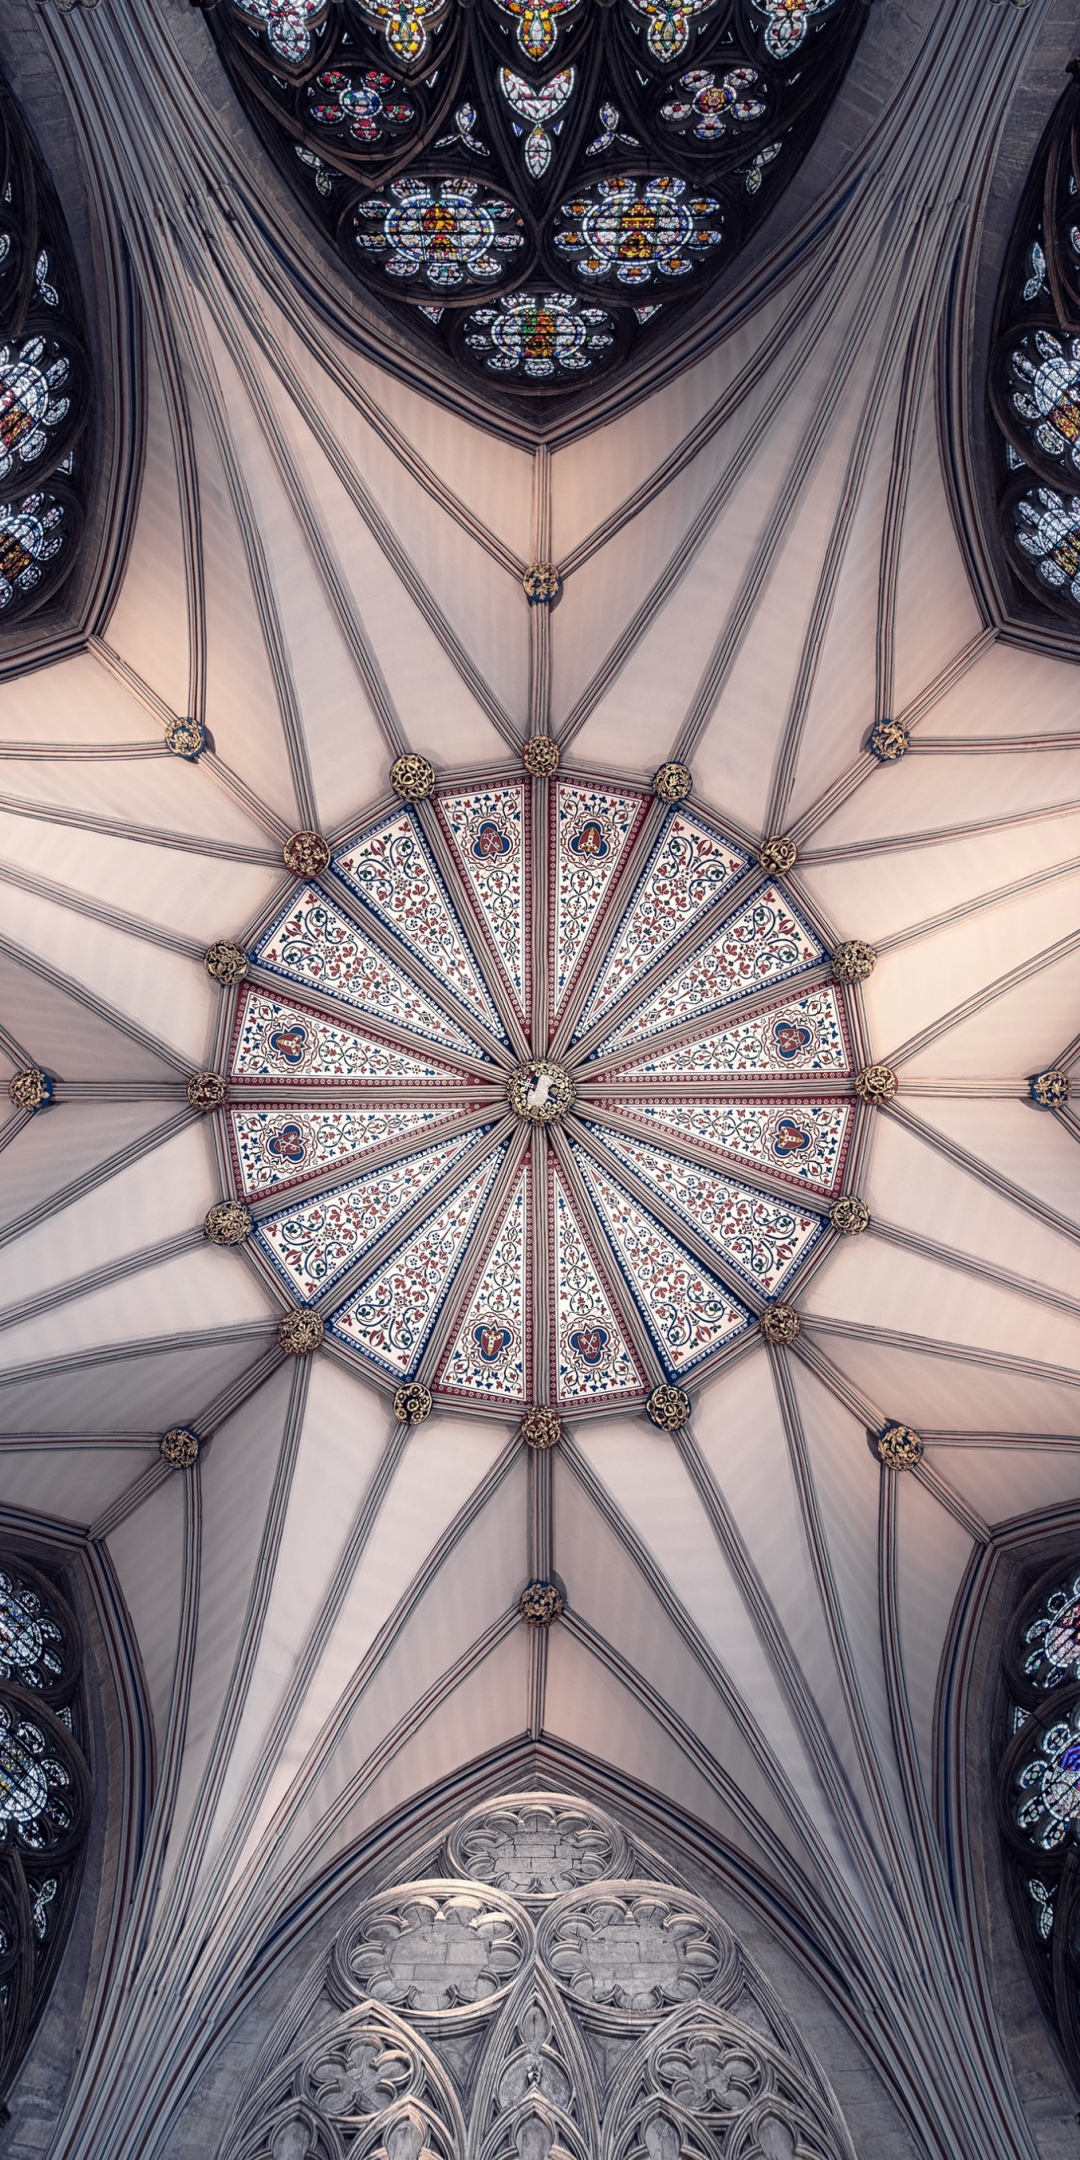 Ceiling, cathedral, interior, architecture, 1080x2160 wallpaper